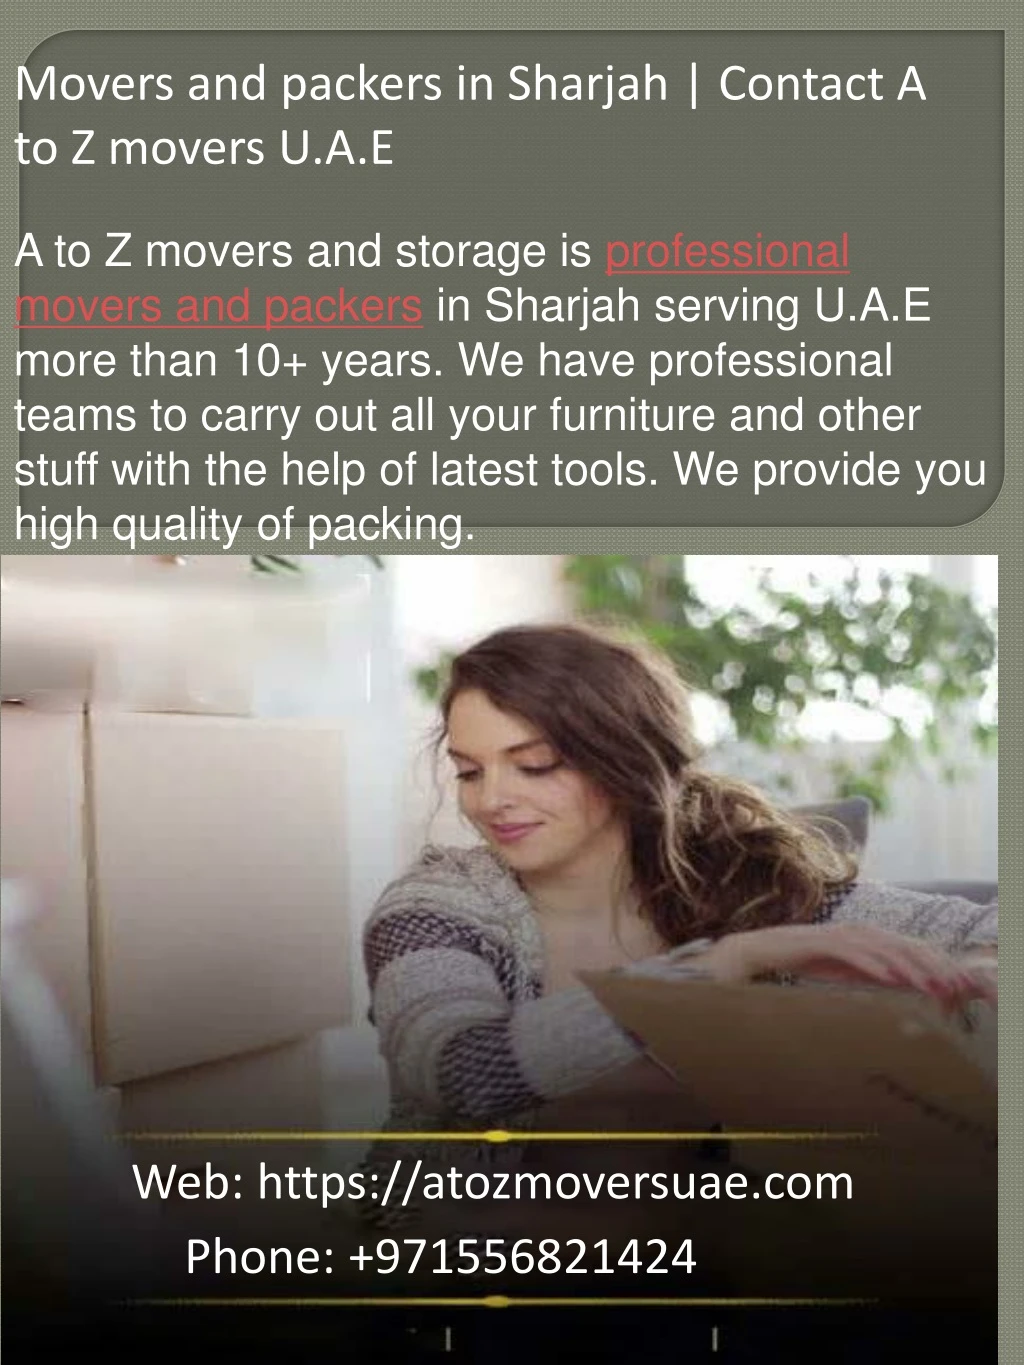 movers and packers in sharjah contact